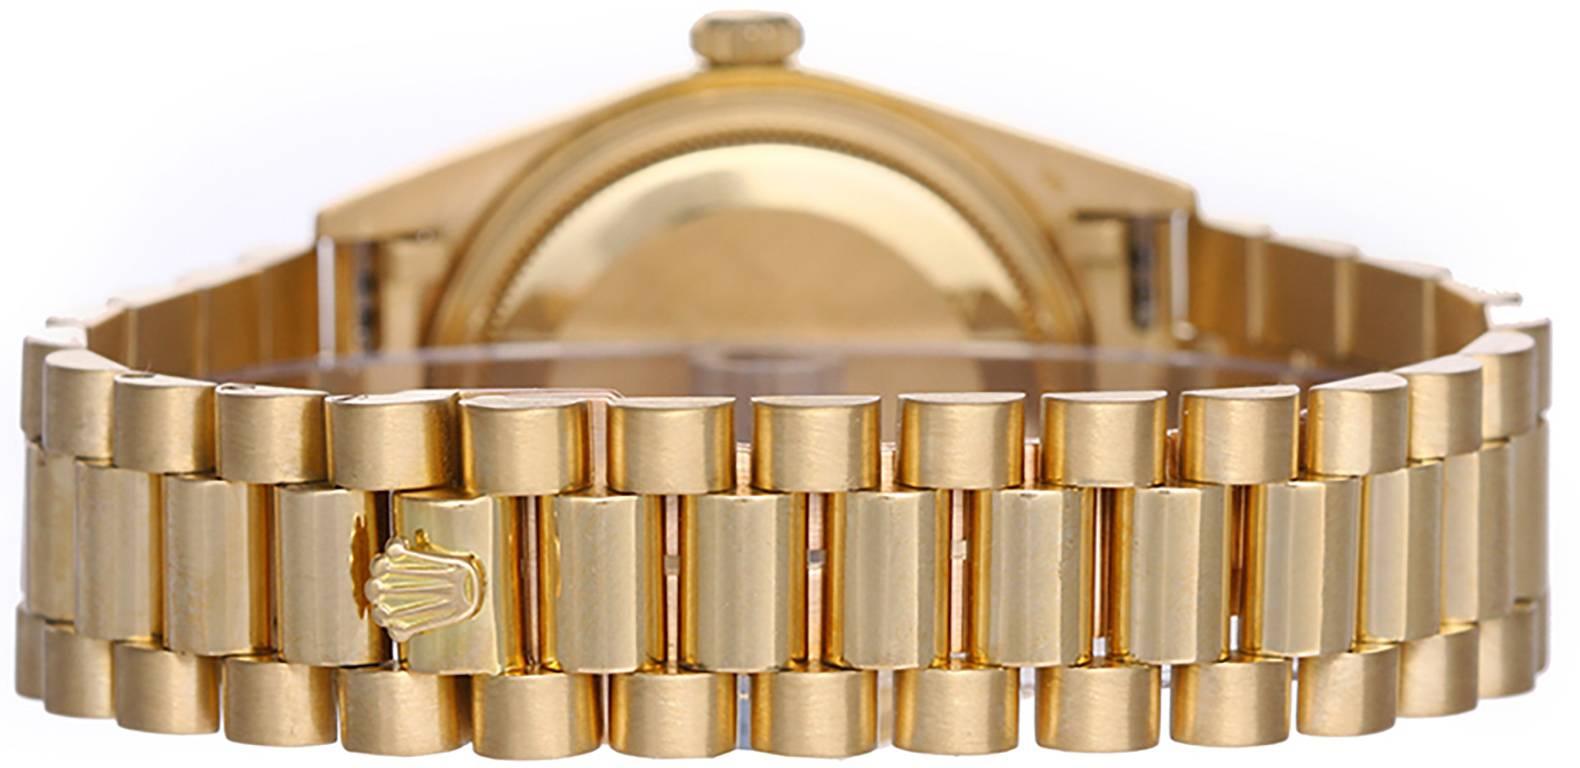 Automatic winding; quick-set; sapphire crystal. 18k yellow gold case with fluted bezel (36mm diameter). Silvered dial with factory diamond hour markers. 18k yellow gold hidden-clasp President bracelet. Pre-owned with box and books.  